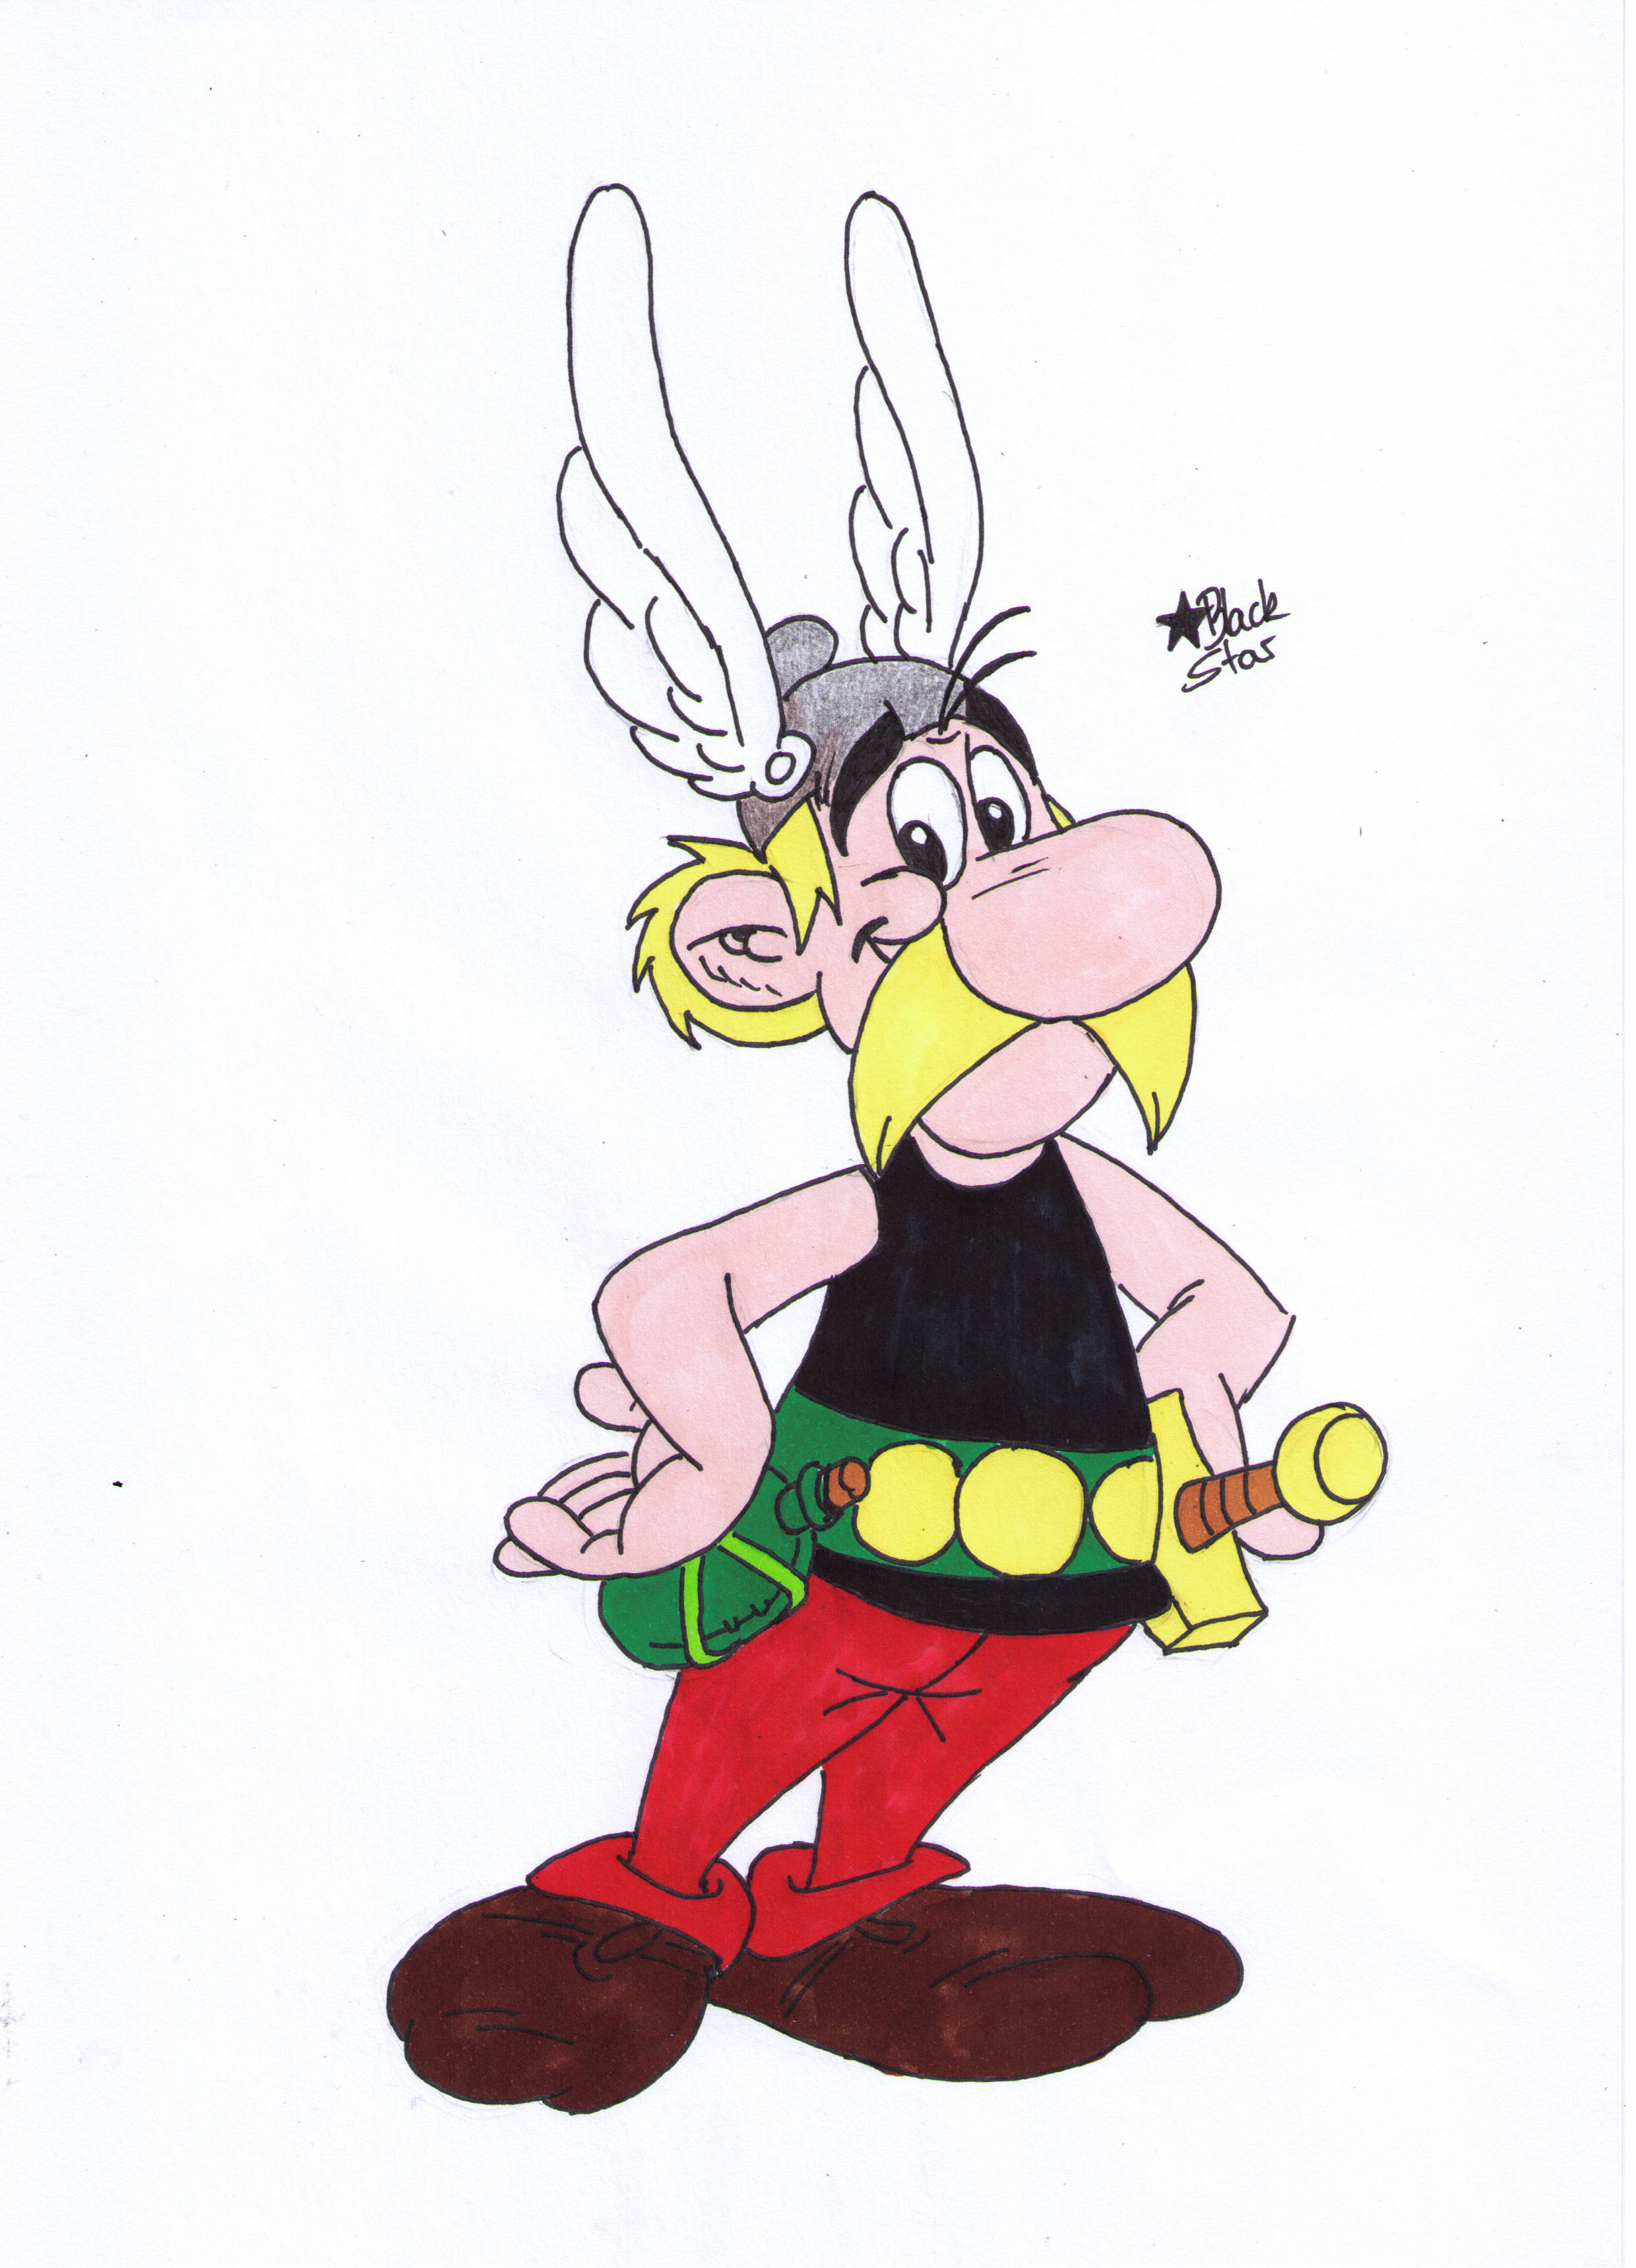 Images of Asterix | 2480x3437